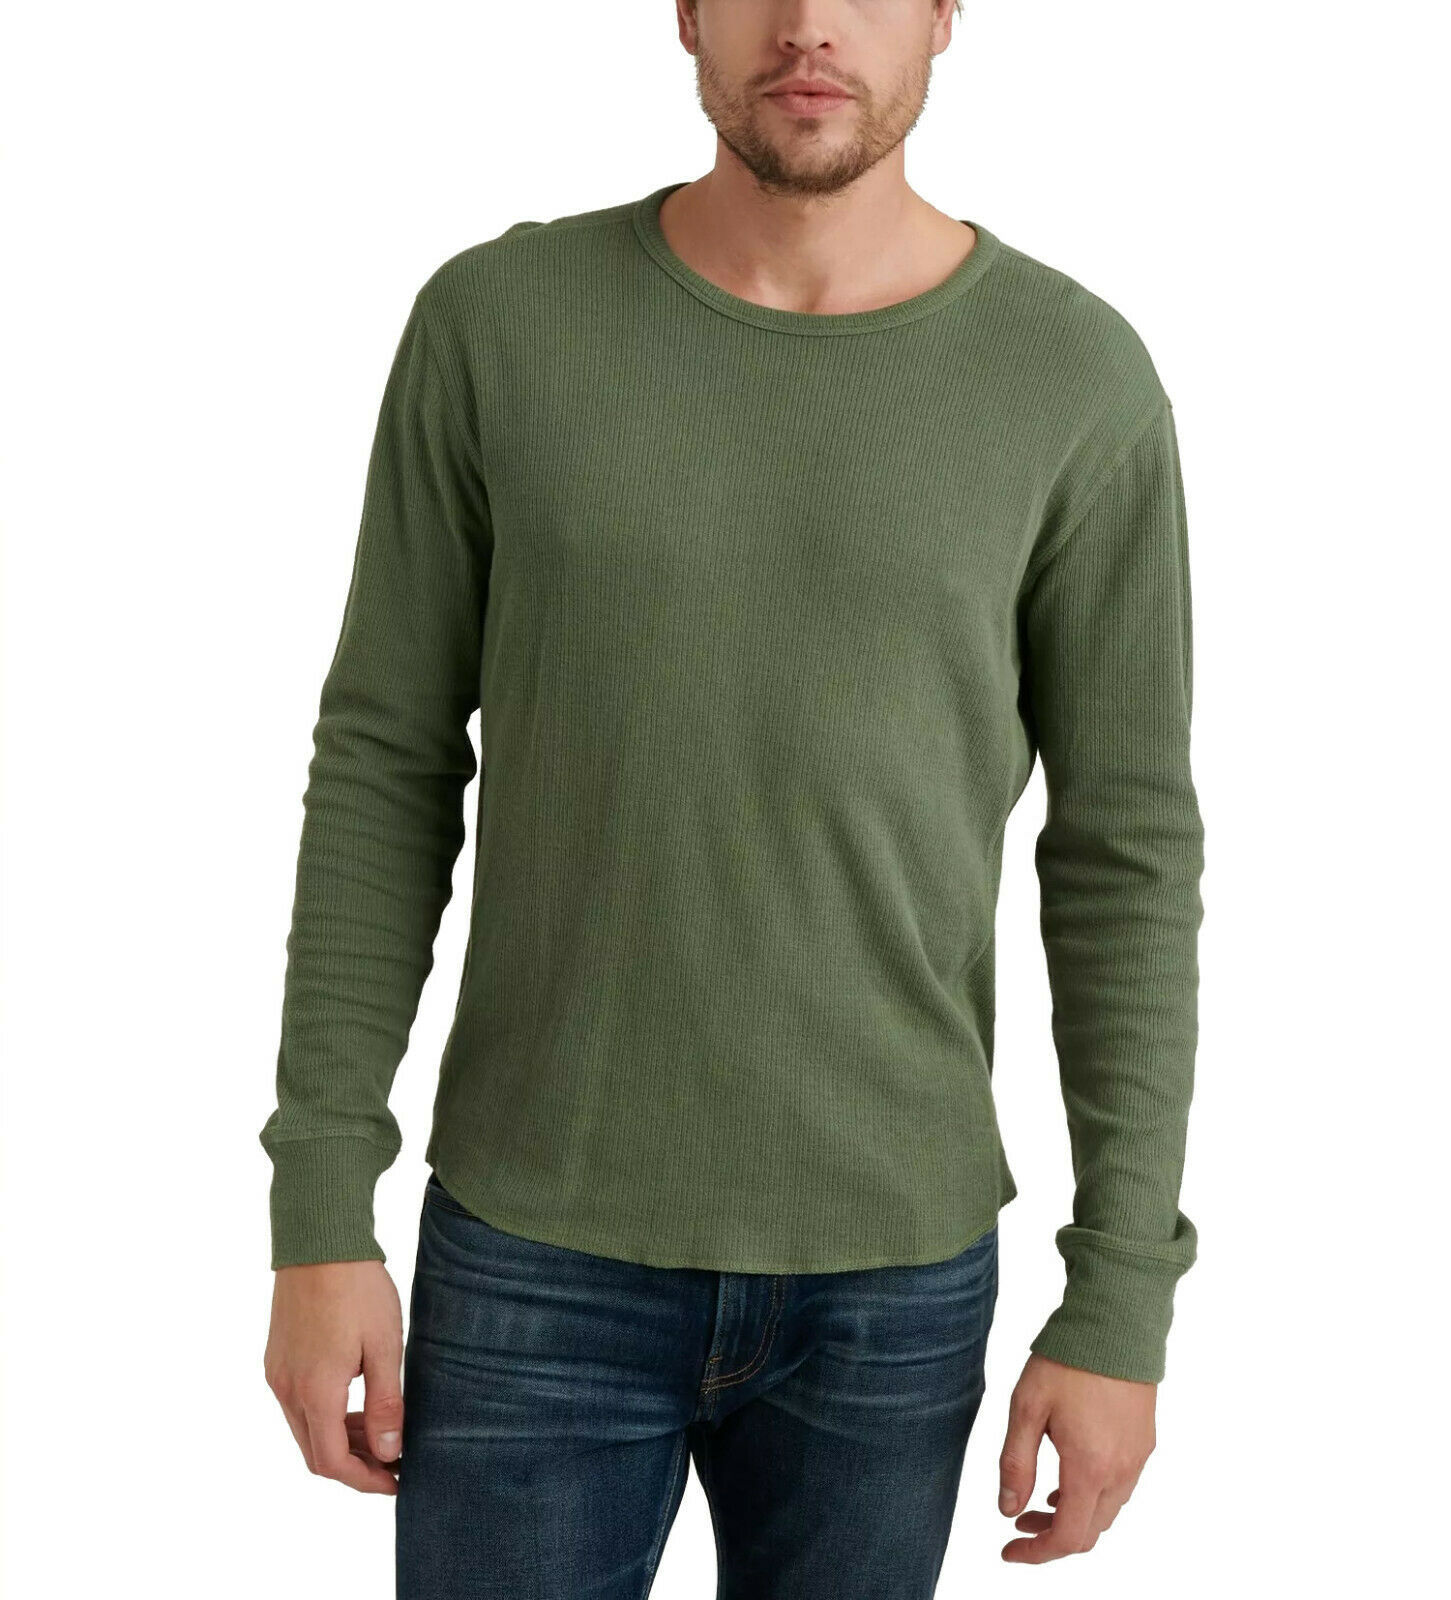 Primary image for Lucky Brand Men's French Rib Long Sleeve Crew Neck Shirt,Agave Green,2XL(3310-9)